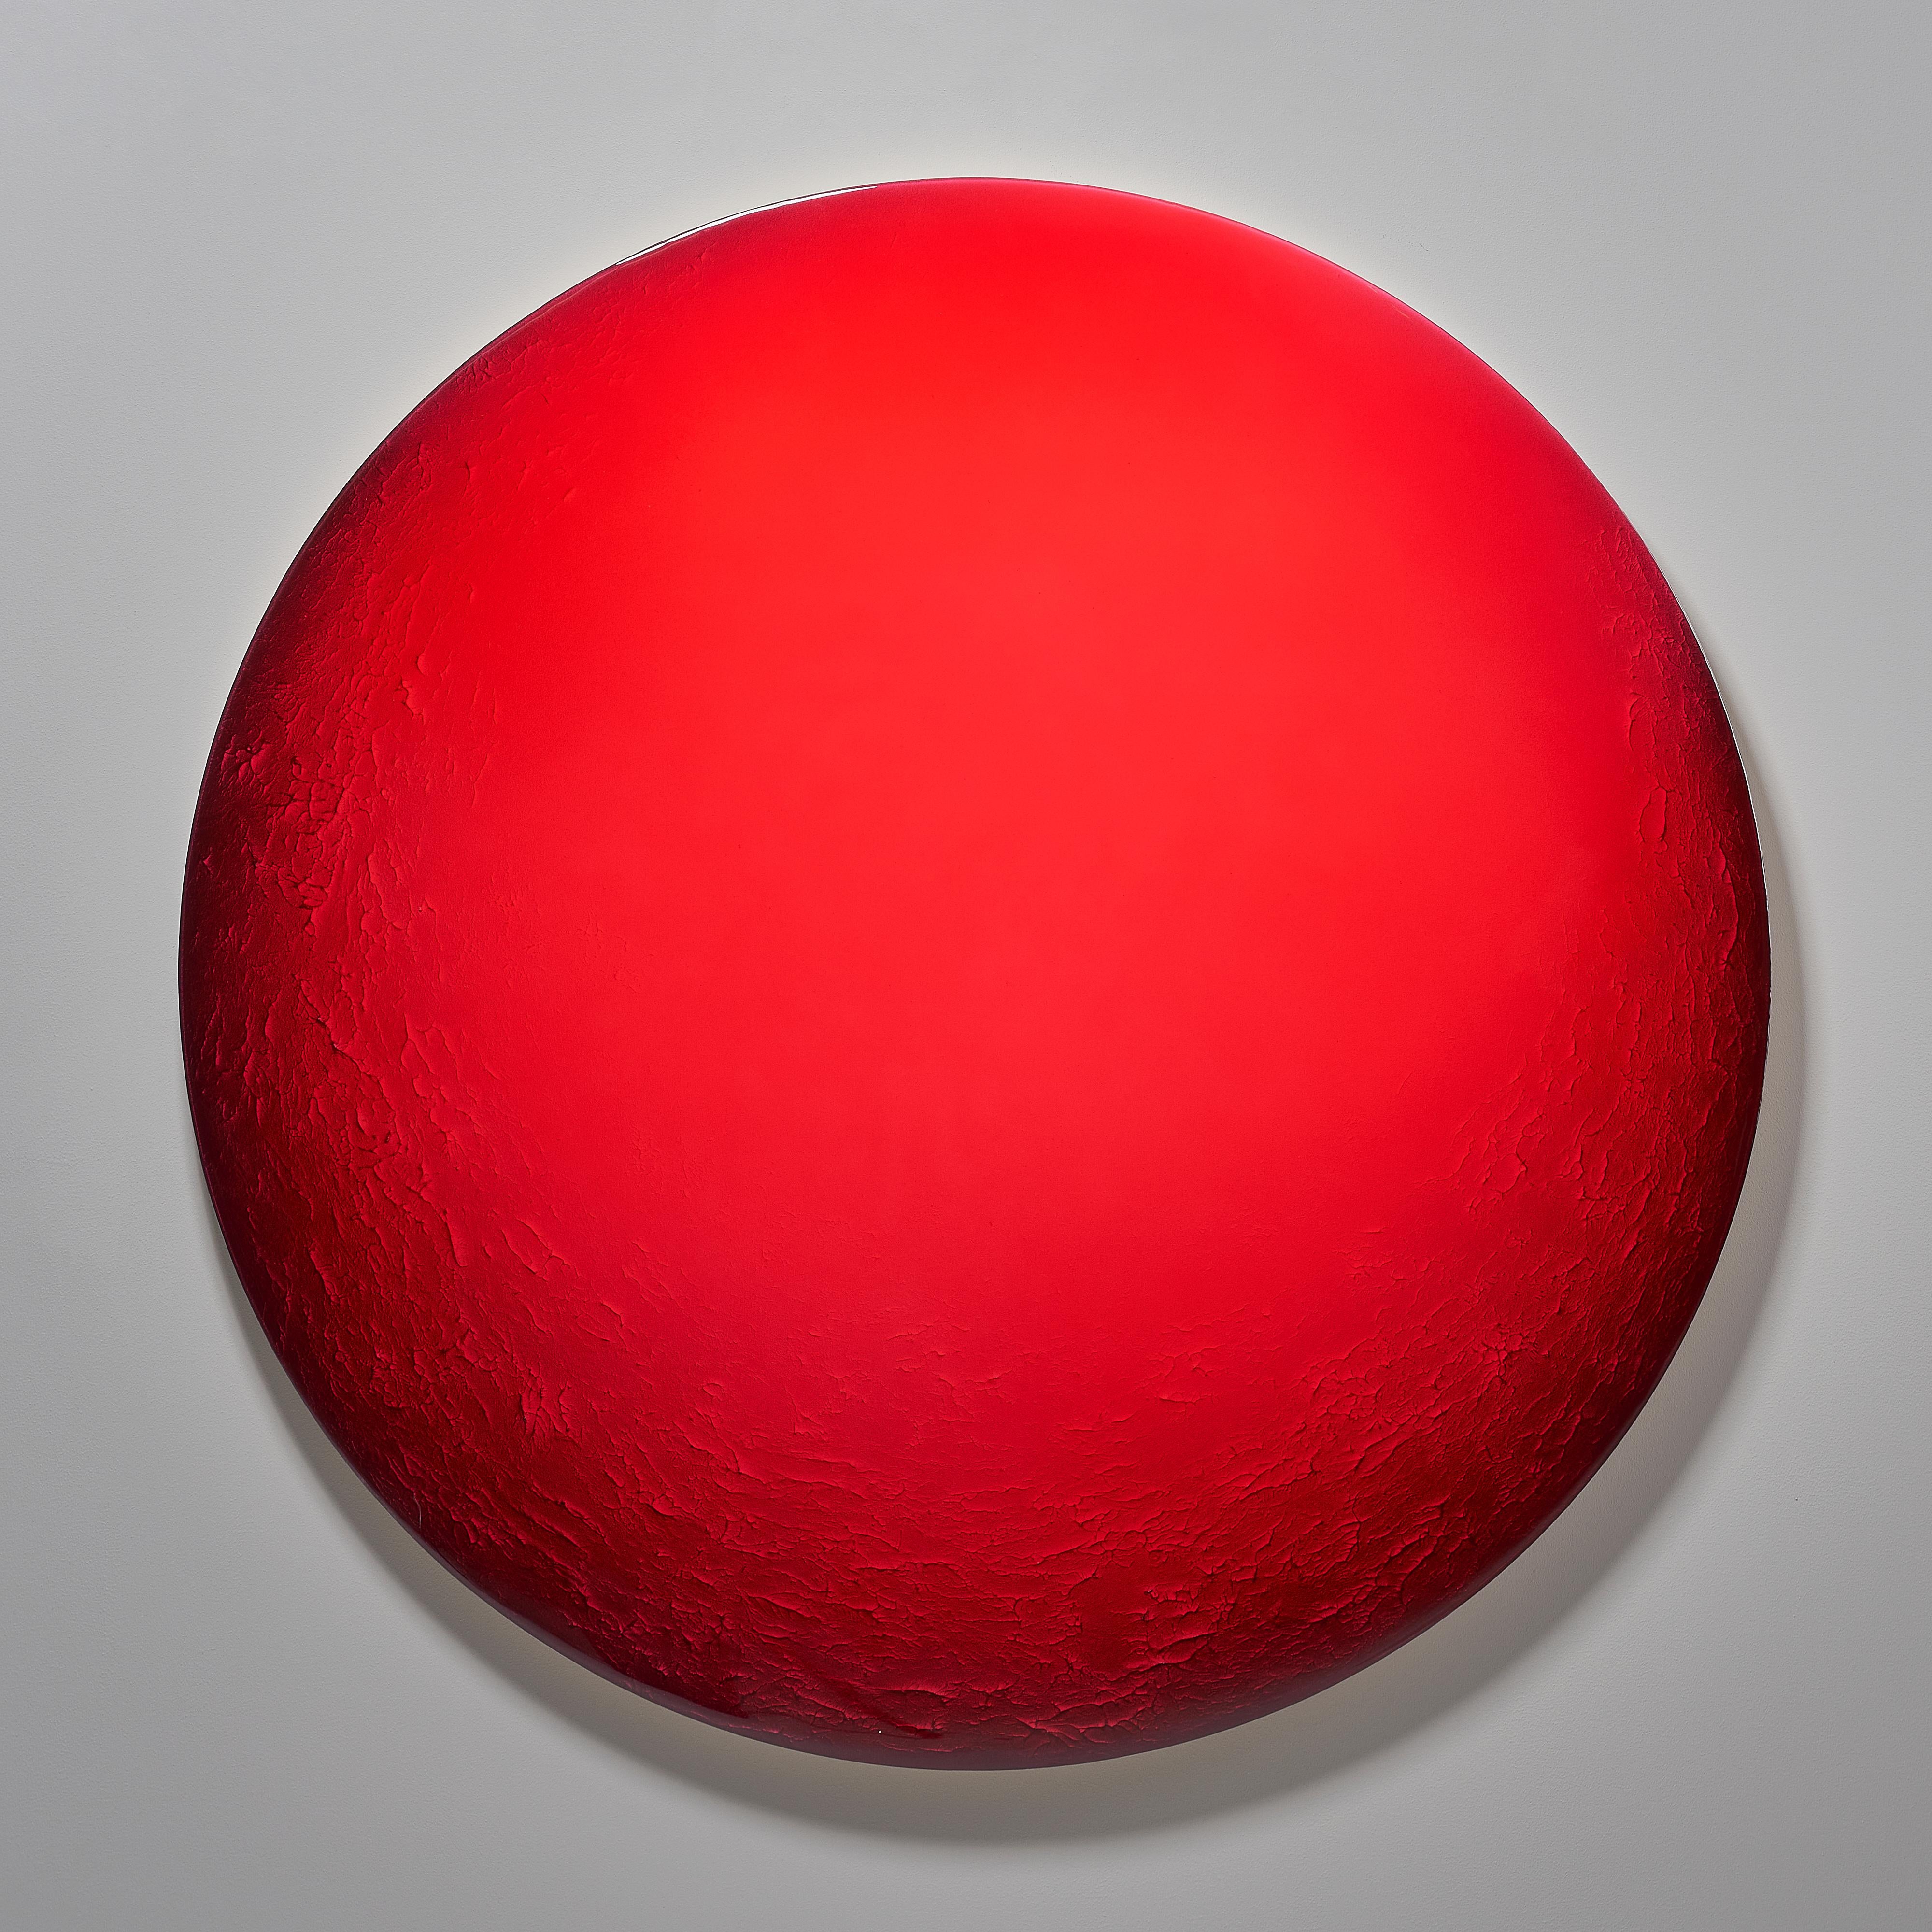 Hard around the edges minimalistic round by Corine Vanvoorbergen
Dimensions: diameter 150 cm
Materials: Brass, wood, natural pigments, epoxy, acrylics

You can still embrace me, I am soft if you come close enough.
The inspiration for this piece